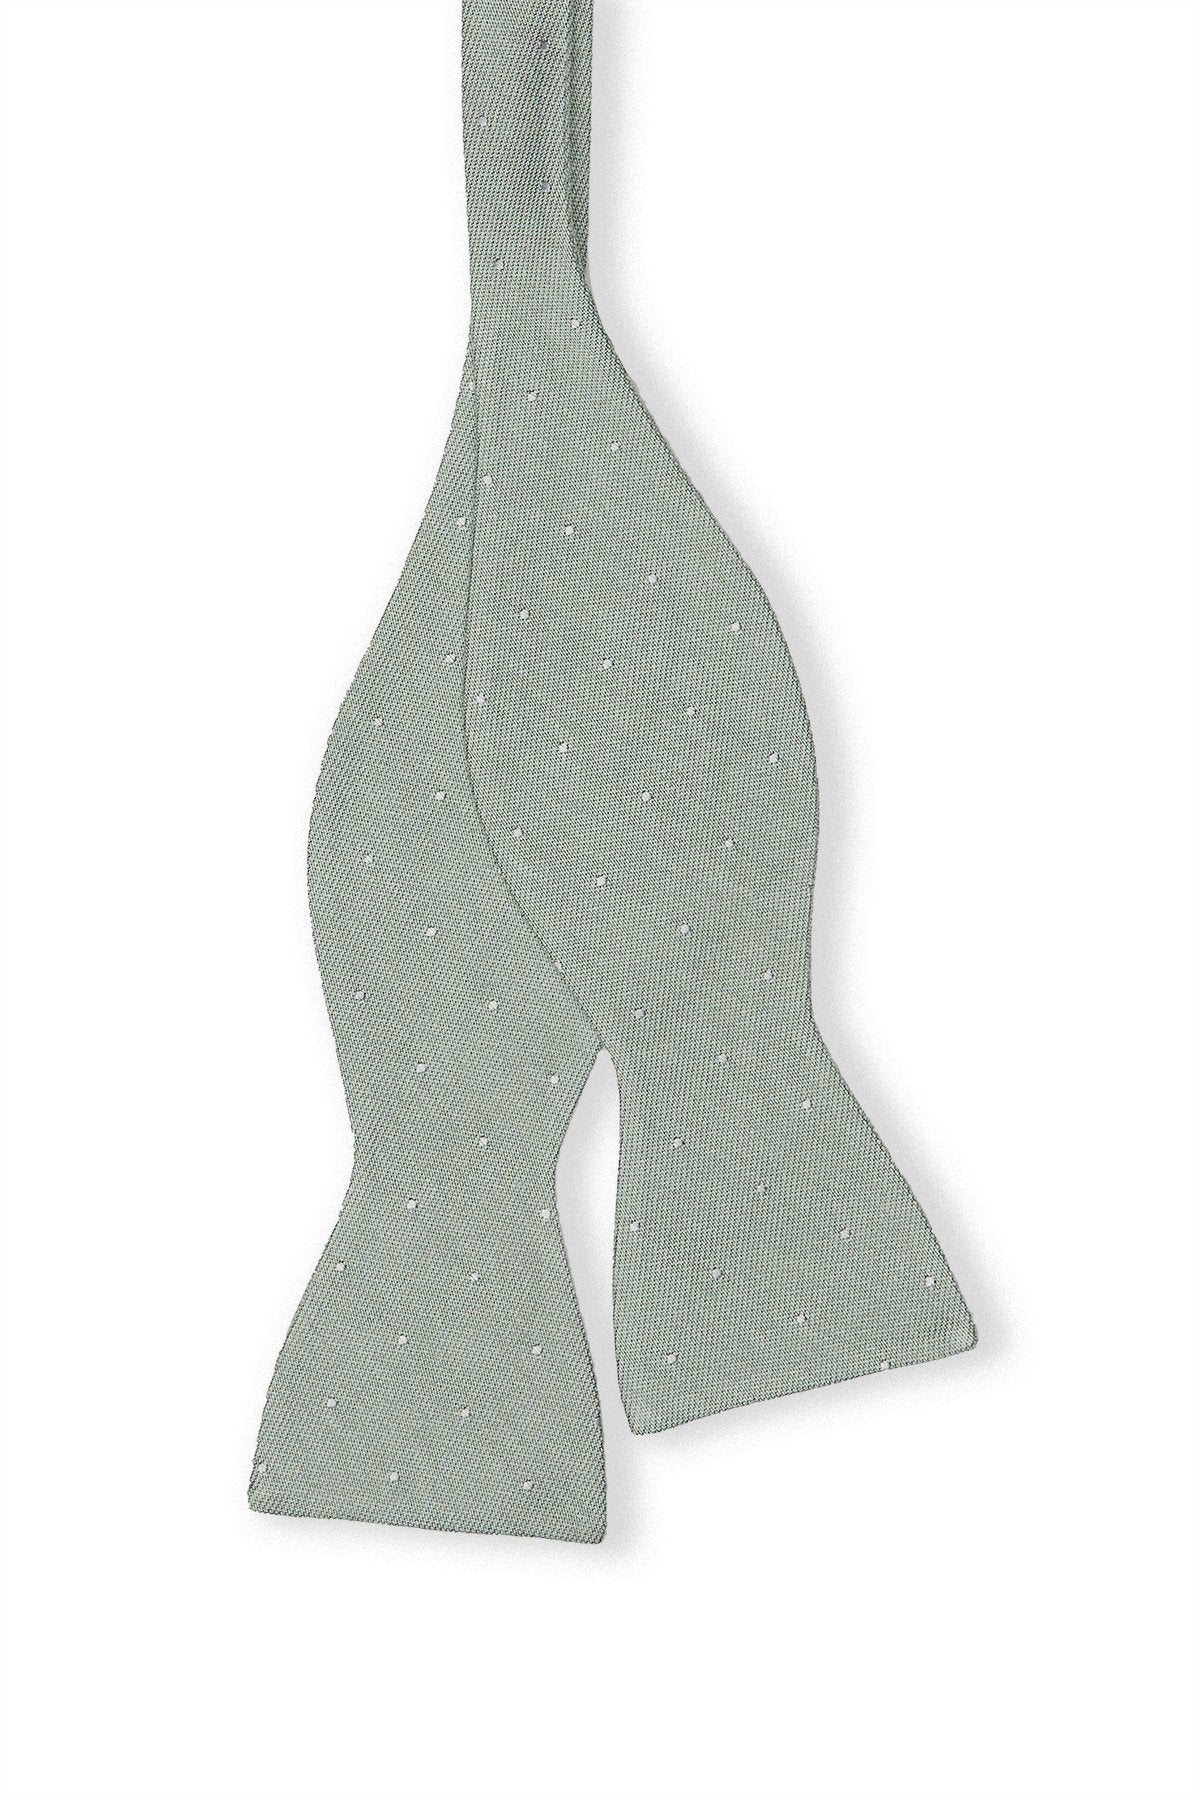 Daniel Bow Tie in Sage Dot by Birdy Grey, front view